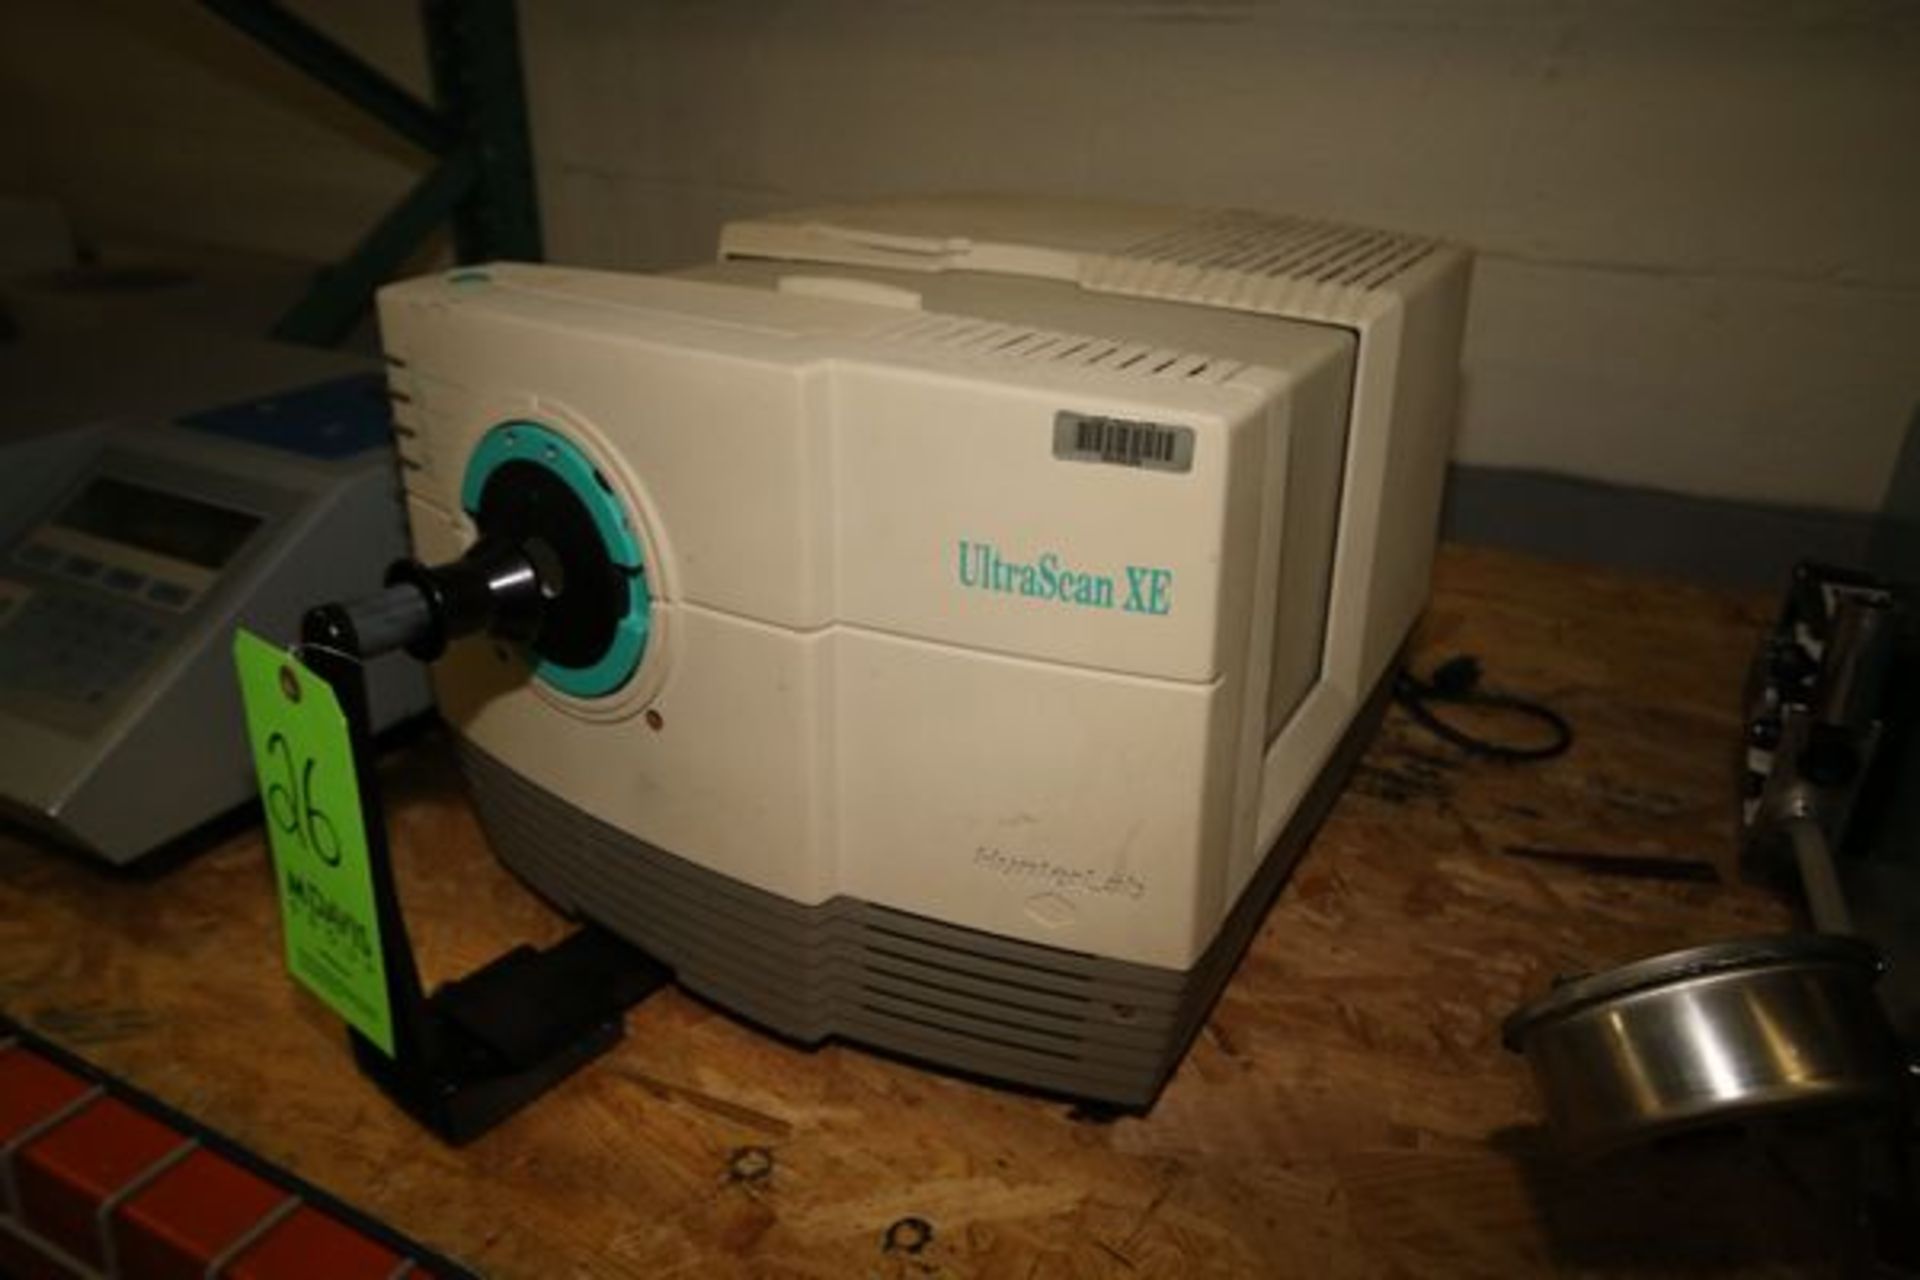 HunterLab UltraScan XE Spectrophotometer, S/N 2074, with 14" Long x 4" Wide x 6 1/2" High Scanning